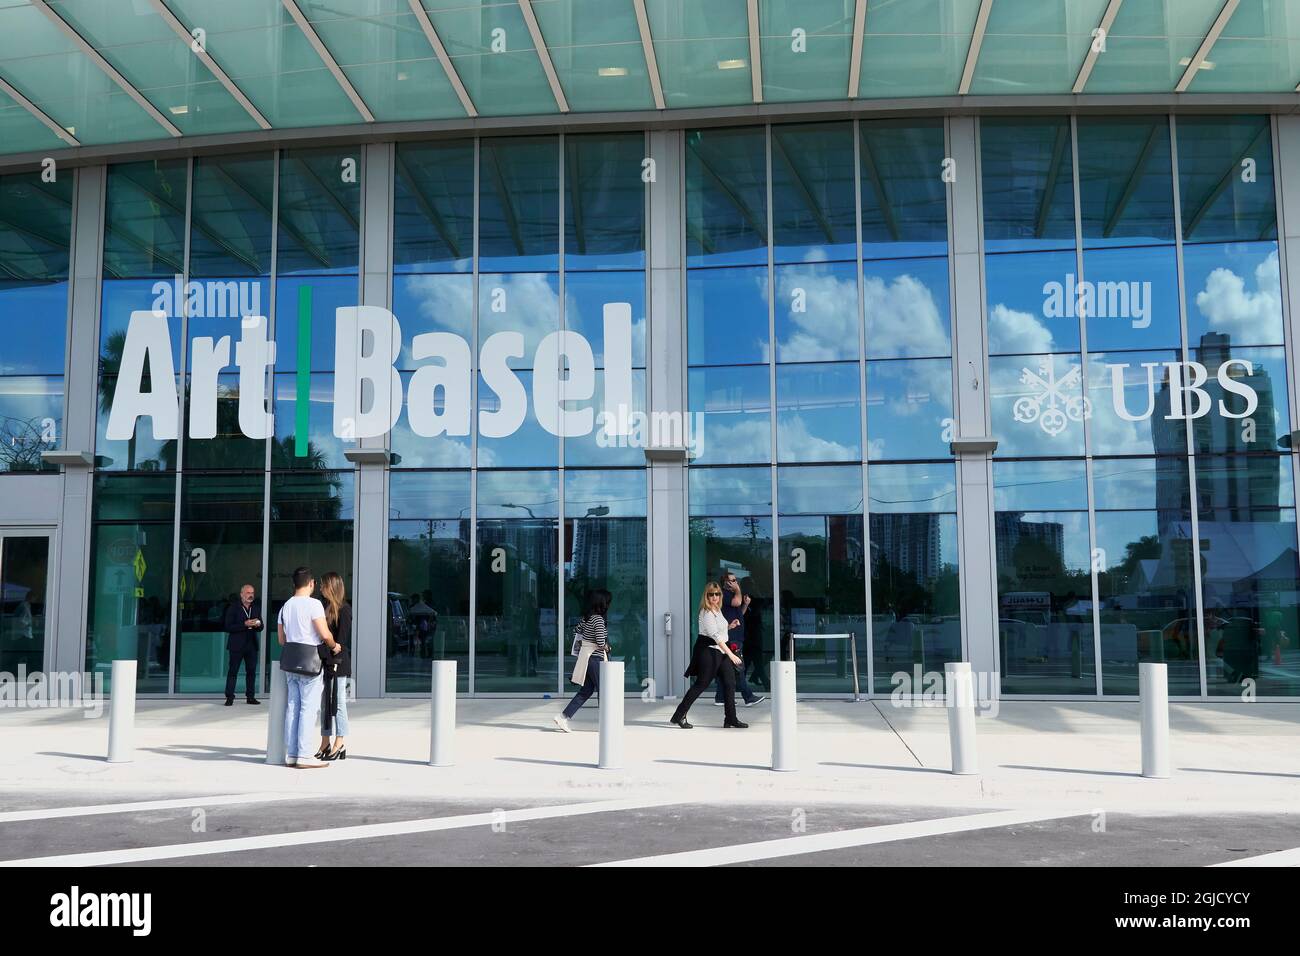 USA, Florida, Miami. The entrance to Art Basel, Miami at the Miami Convention Centers. Art Basel is the world's largest contemporary art fair. Stock Photo